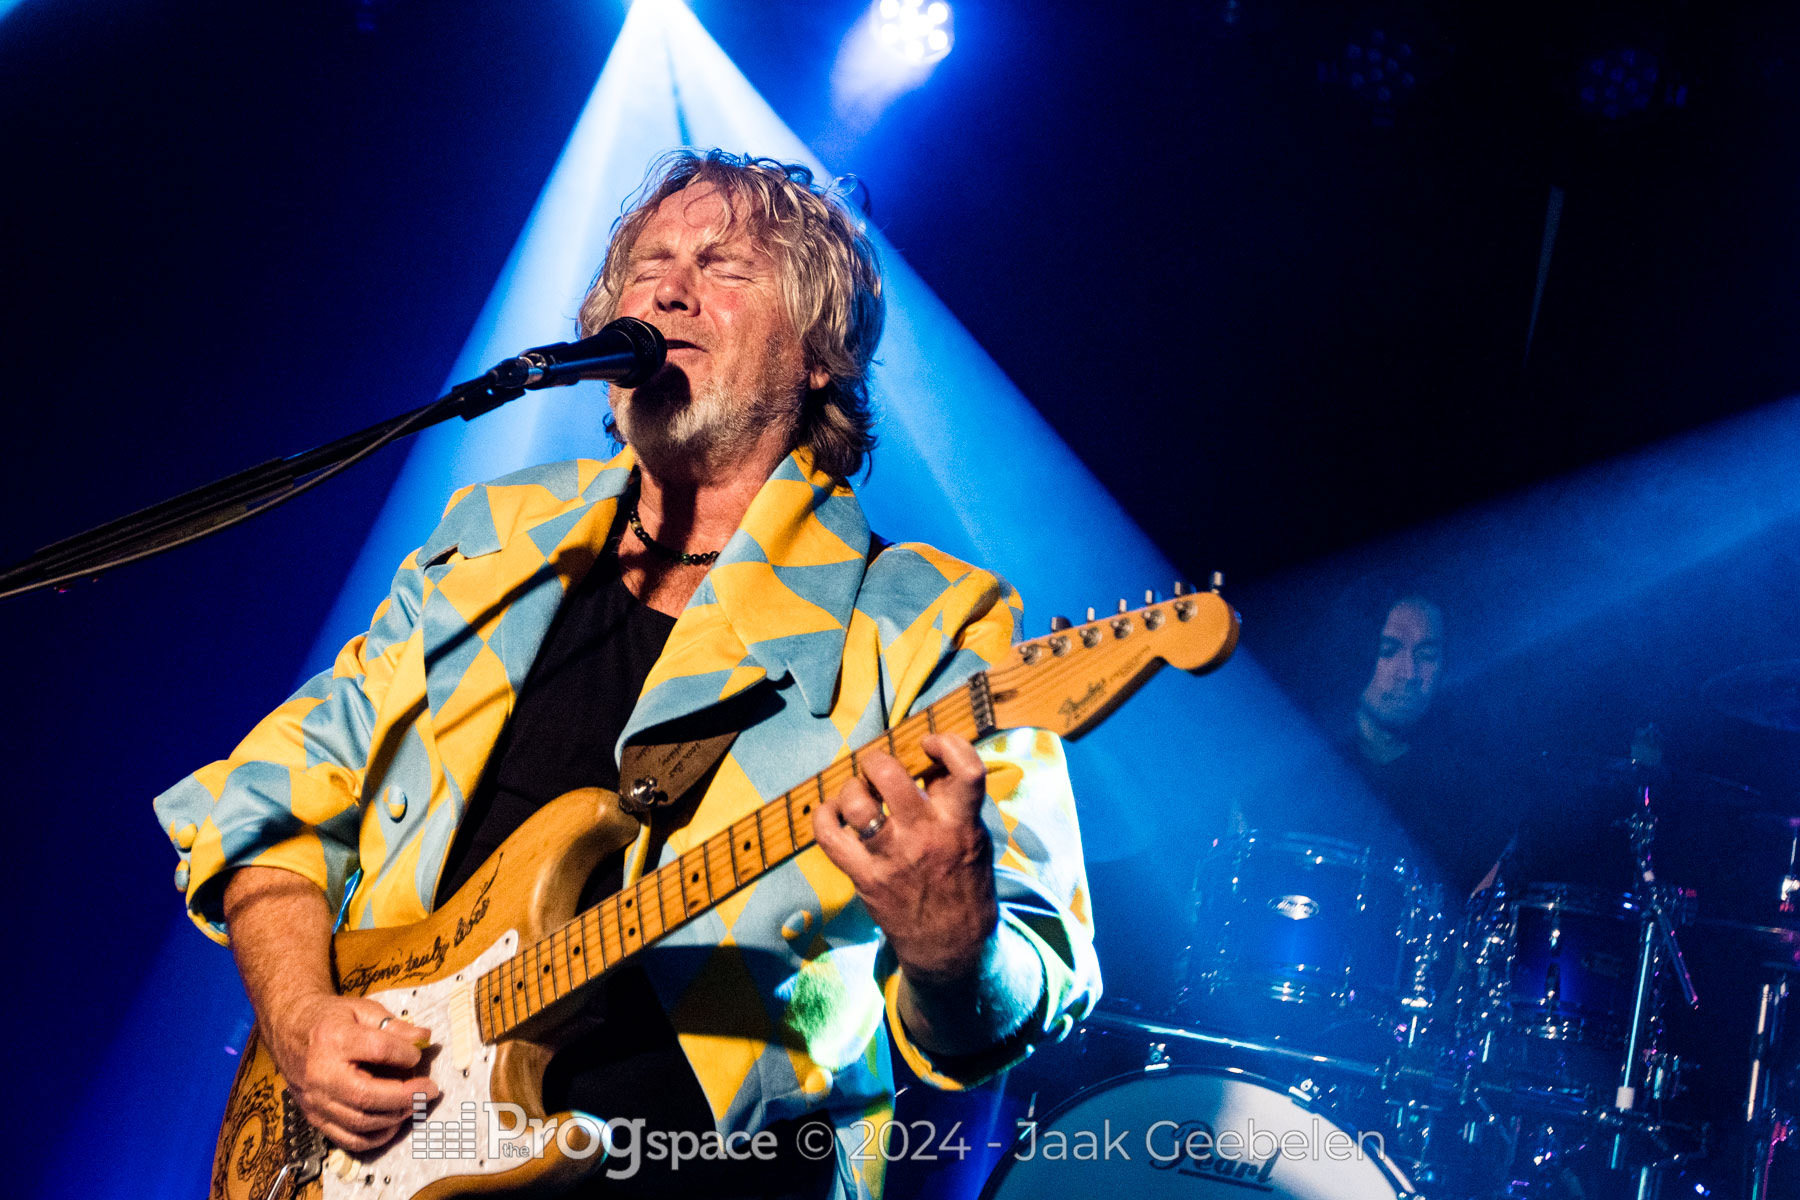 Live review: Pendragon in Ittre, Belgium on 20 May 2024